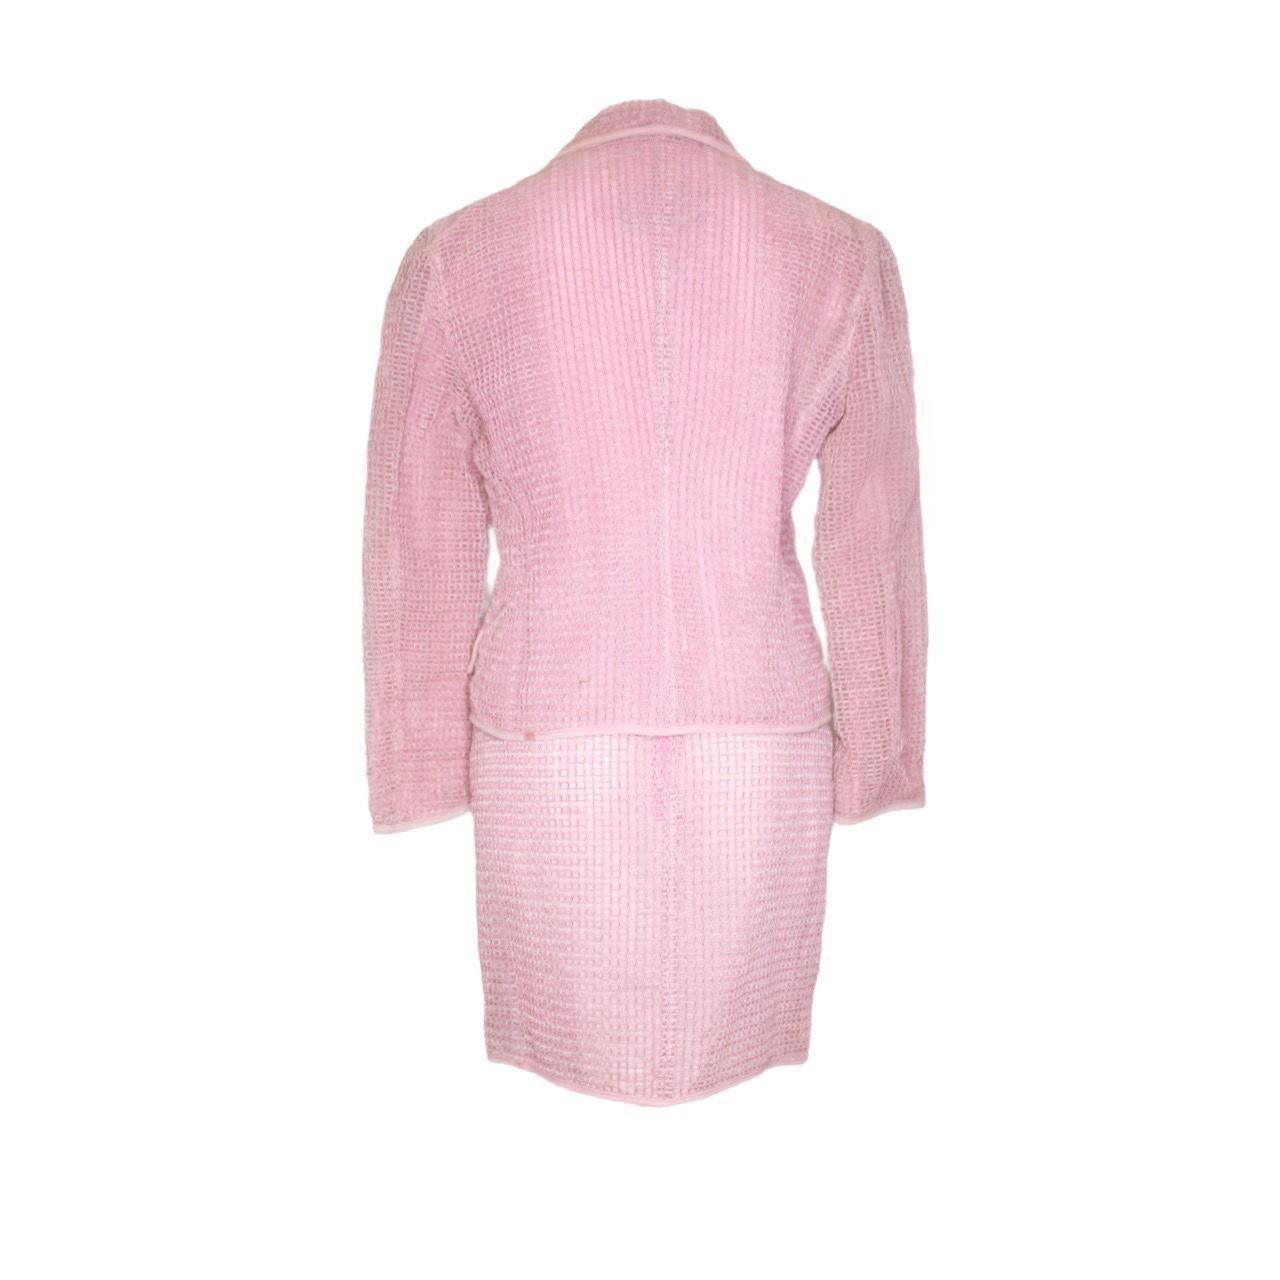 Gianni Versace Suit   Pink Jacket Skirt Set 1990's For Sale 4